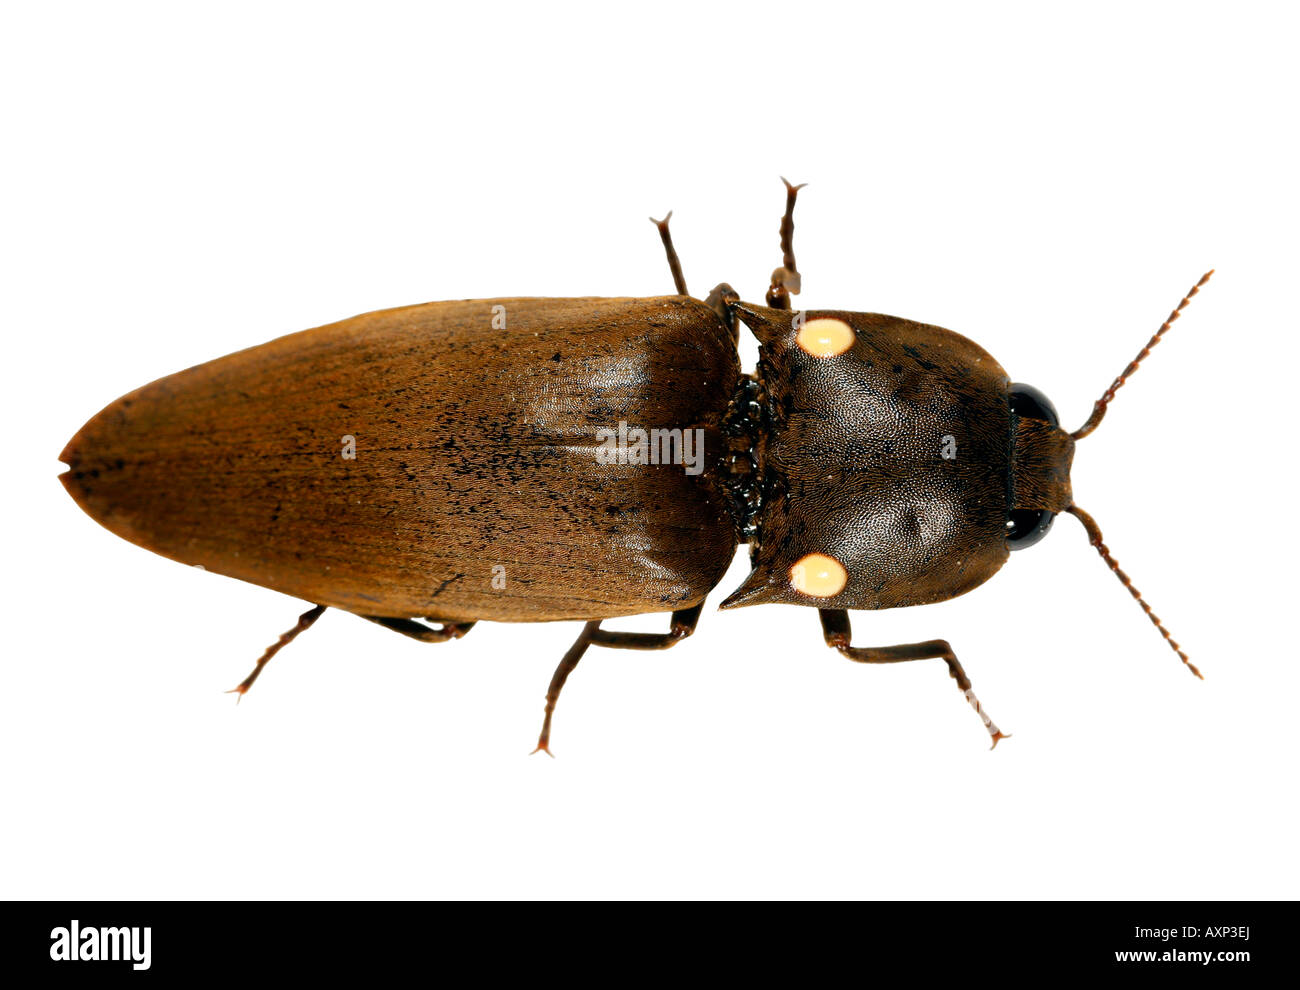 Bioluminescent click beetle (Pyrophorus) from the Amazon with lights off by day Stock Photo